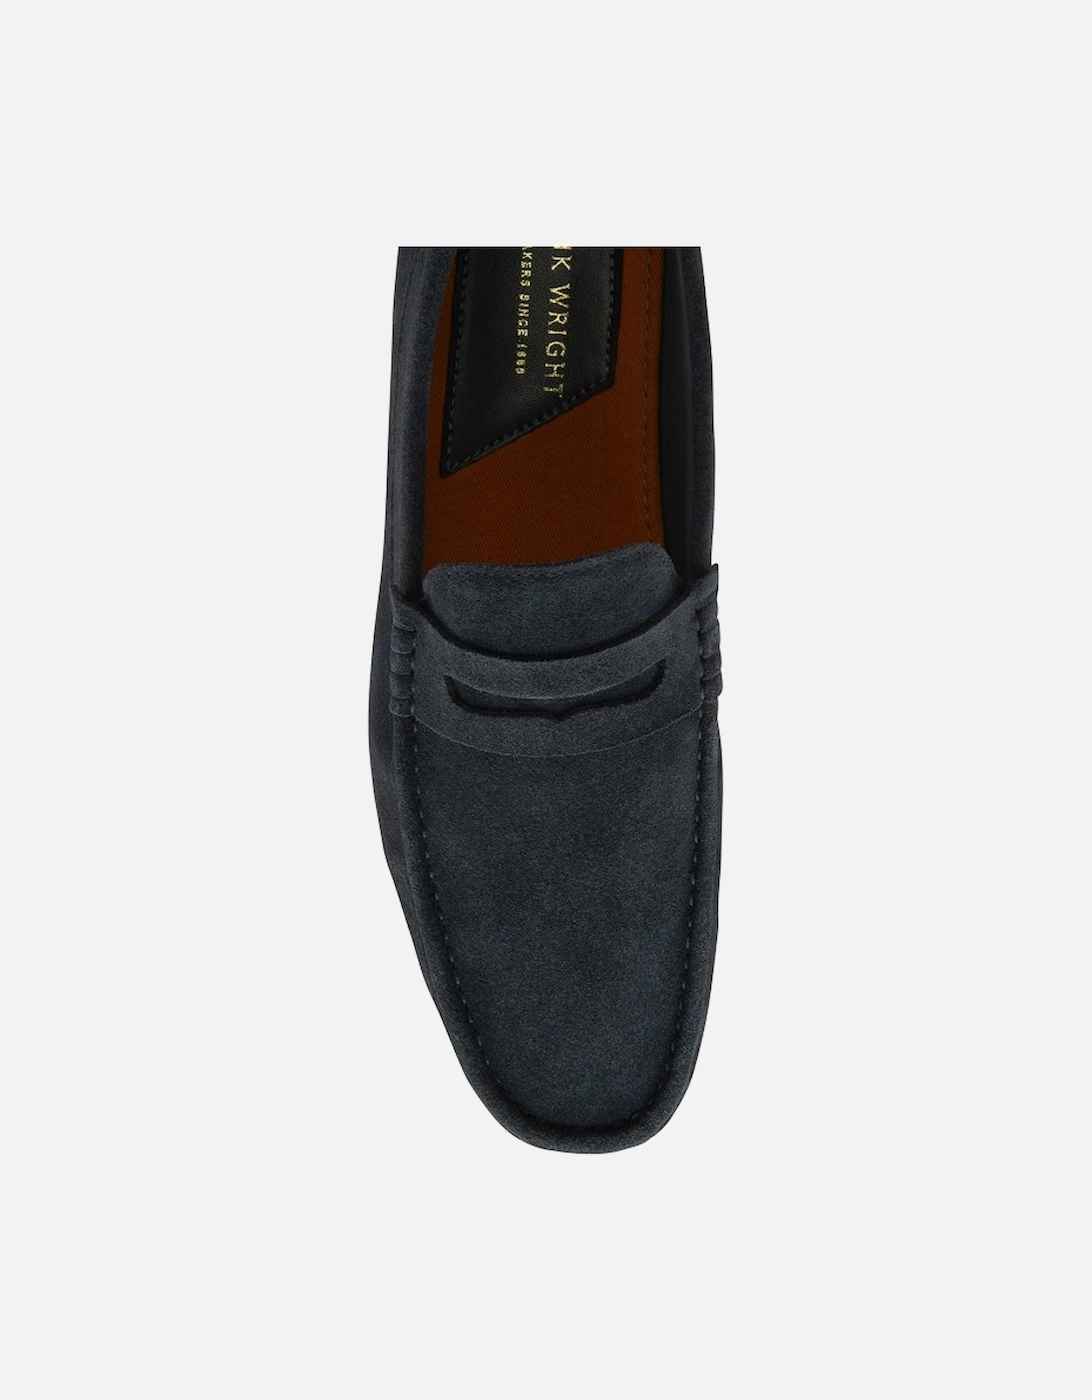 Hearns Mens Moccasins